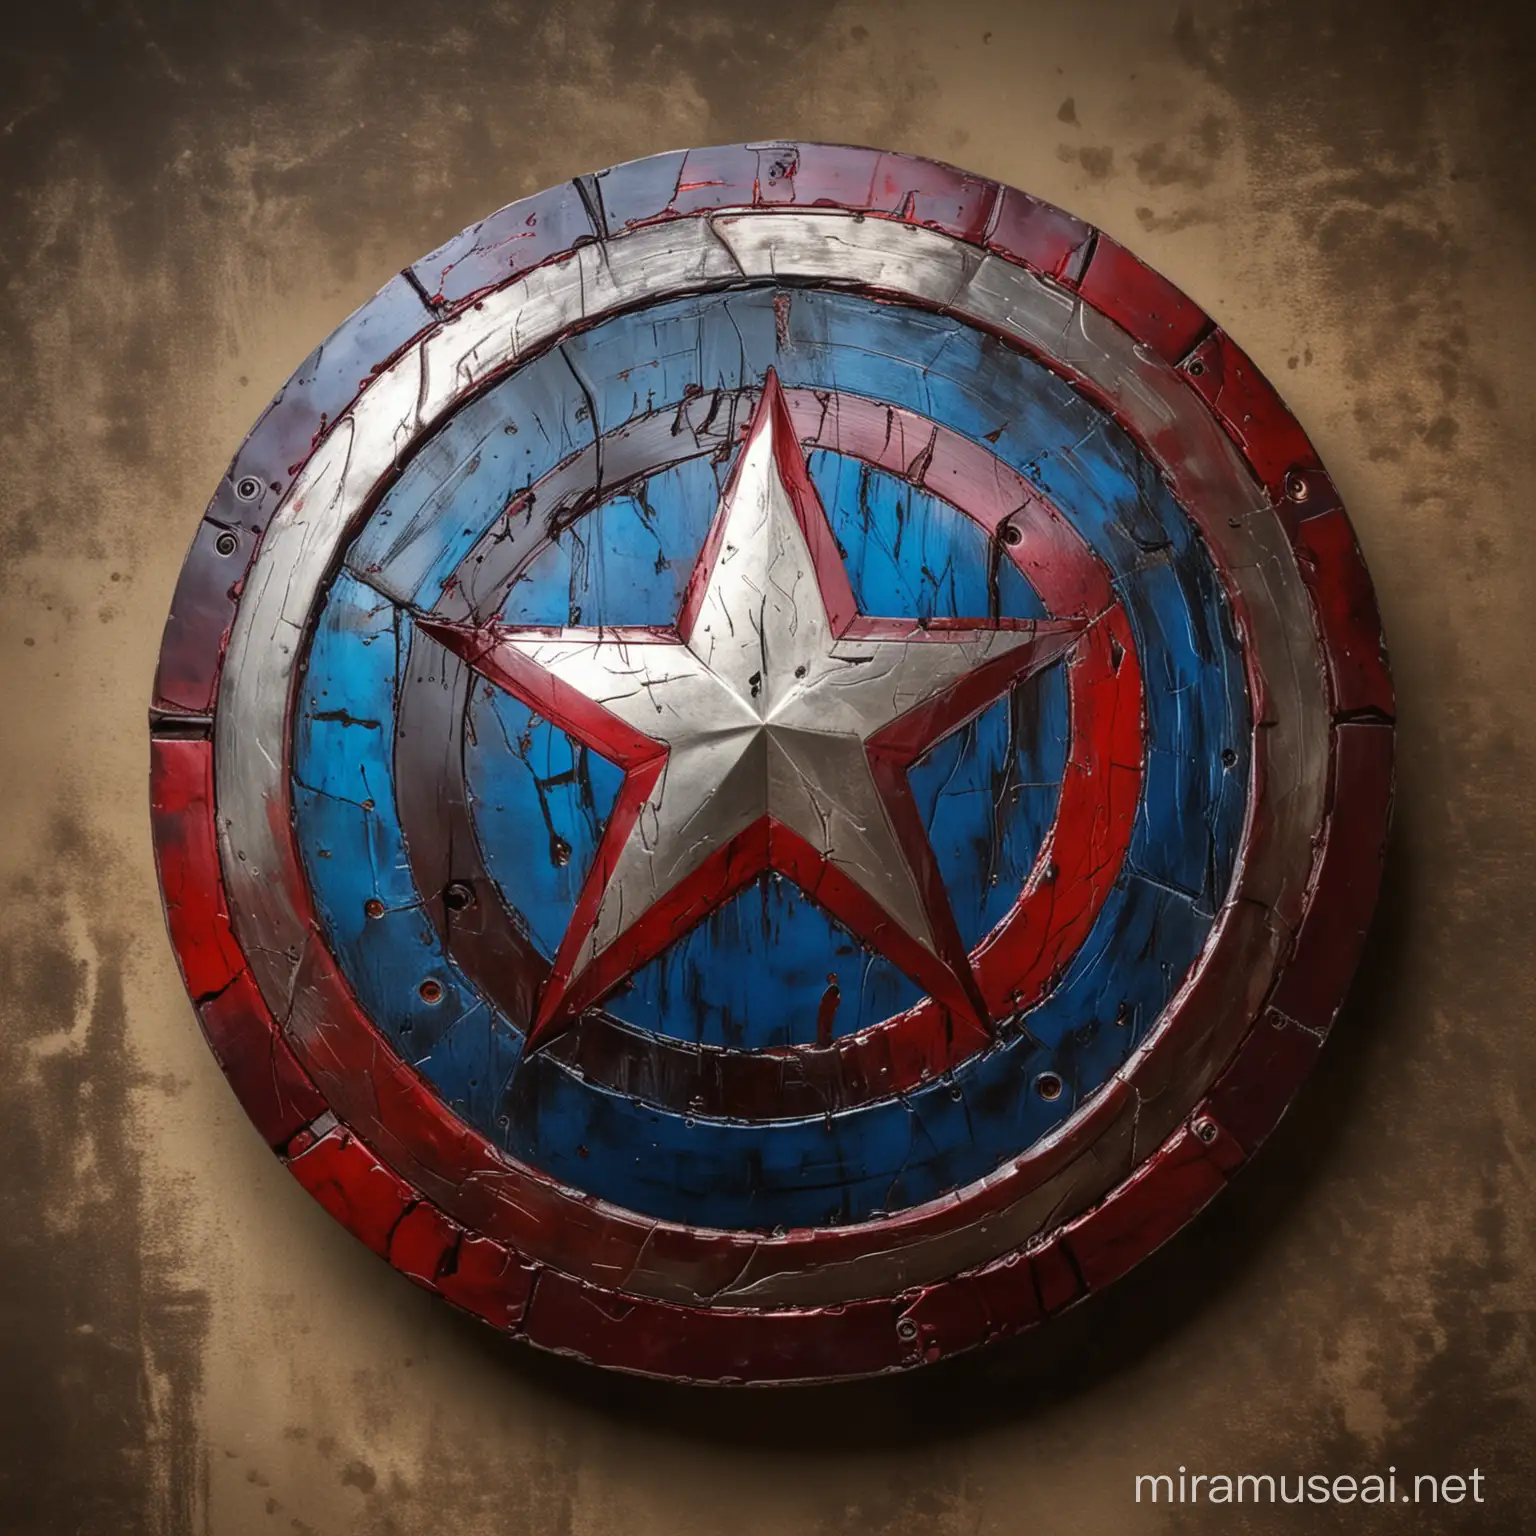 captain Americas shield with vibrant colors and amazing background